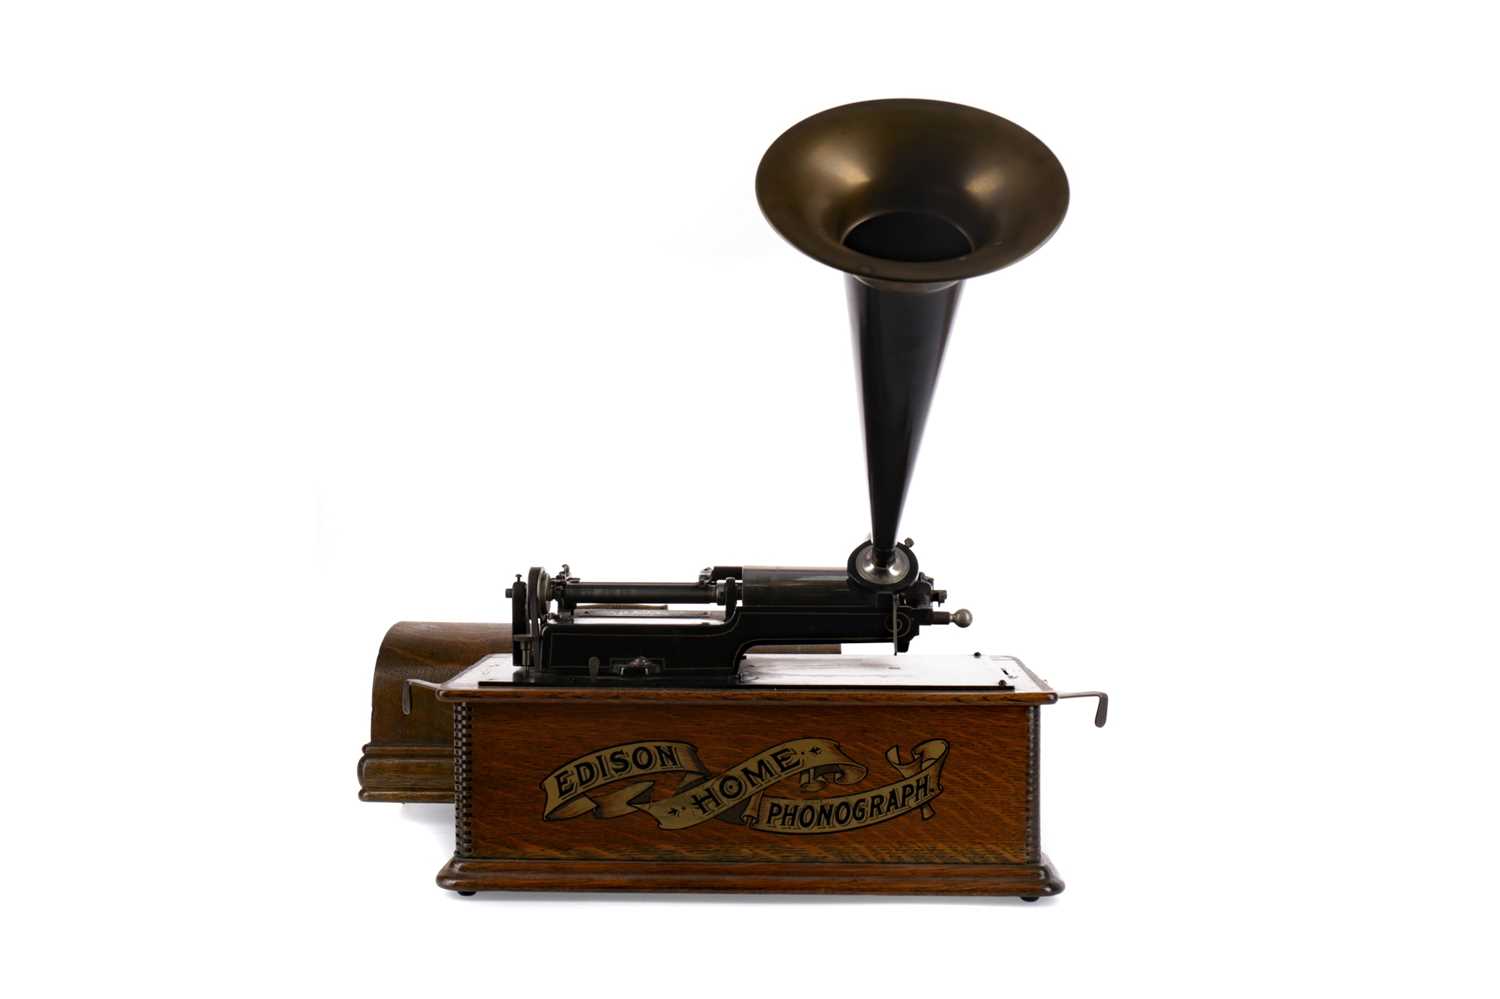 Lot 1117 - AN EARLY 20TH CENTURY EDISON HOME PHONOGRAPH